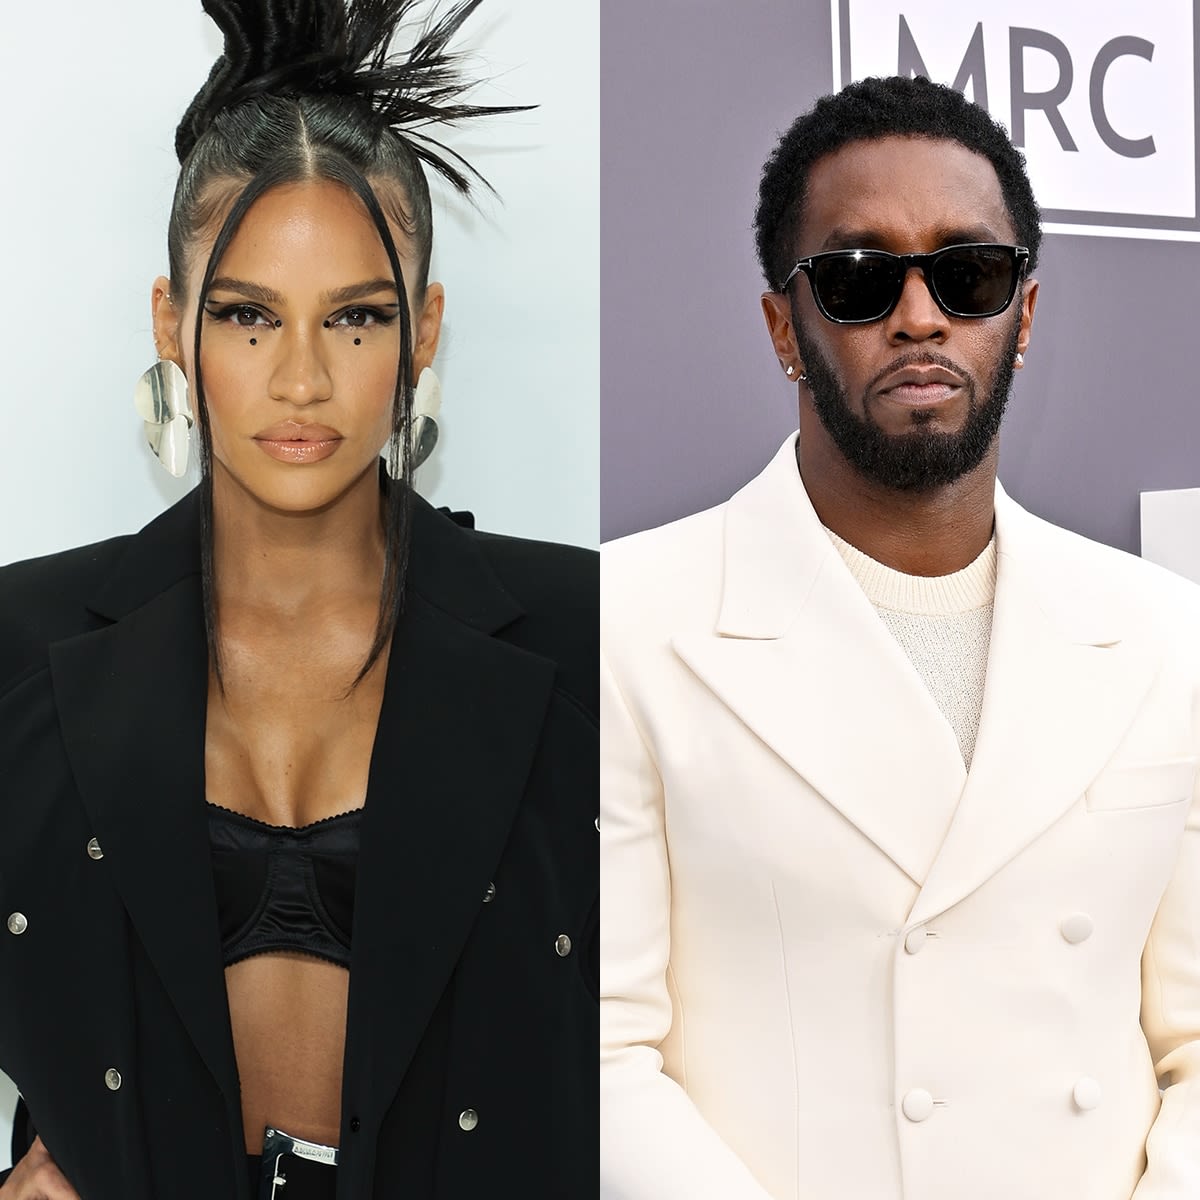 Cassie’s Lawyer Slams Sean "Diddy" Combs’ Recent Outing